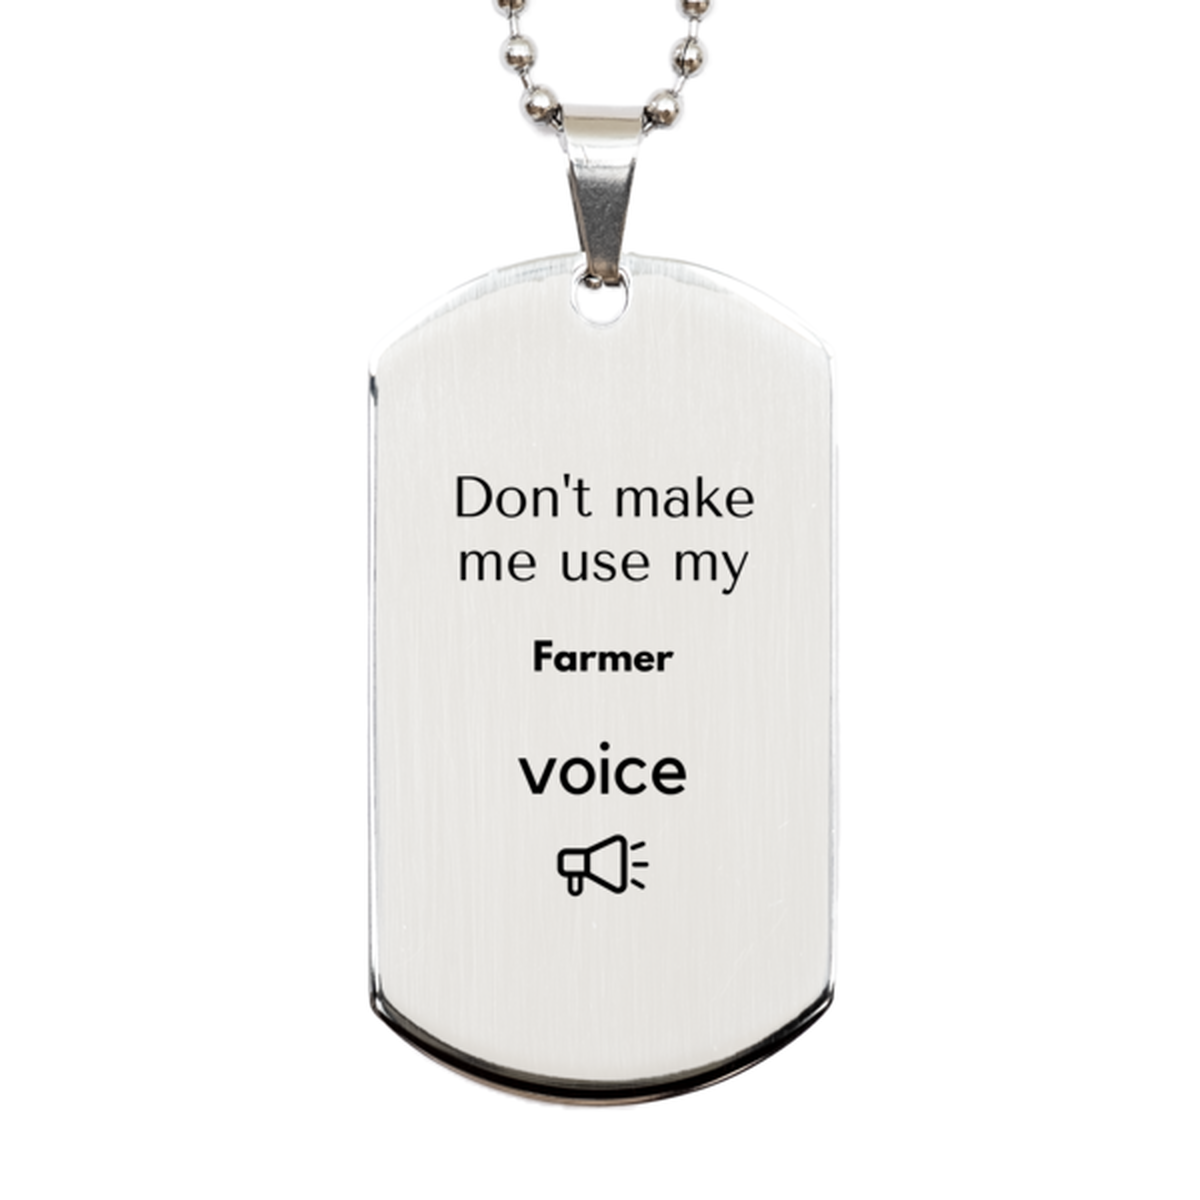 Don't make me use my Farmer voice, Sarcasm Farmer Gifts, Christmas Farmer Silver Dog Tag Birthday Unique Gifts For Farmer Coworkers, Men, Women, Colleague, Friends